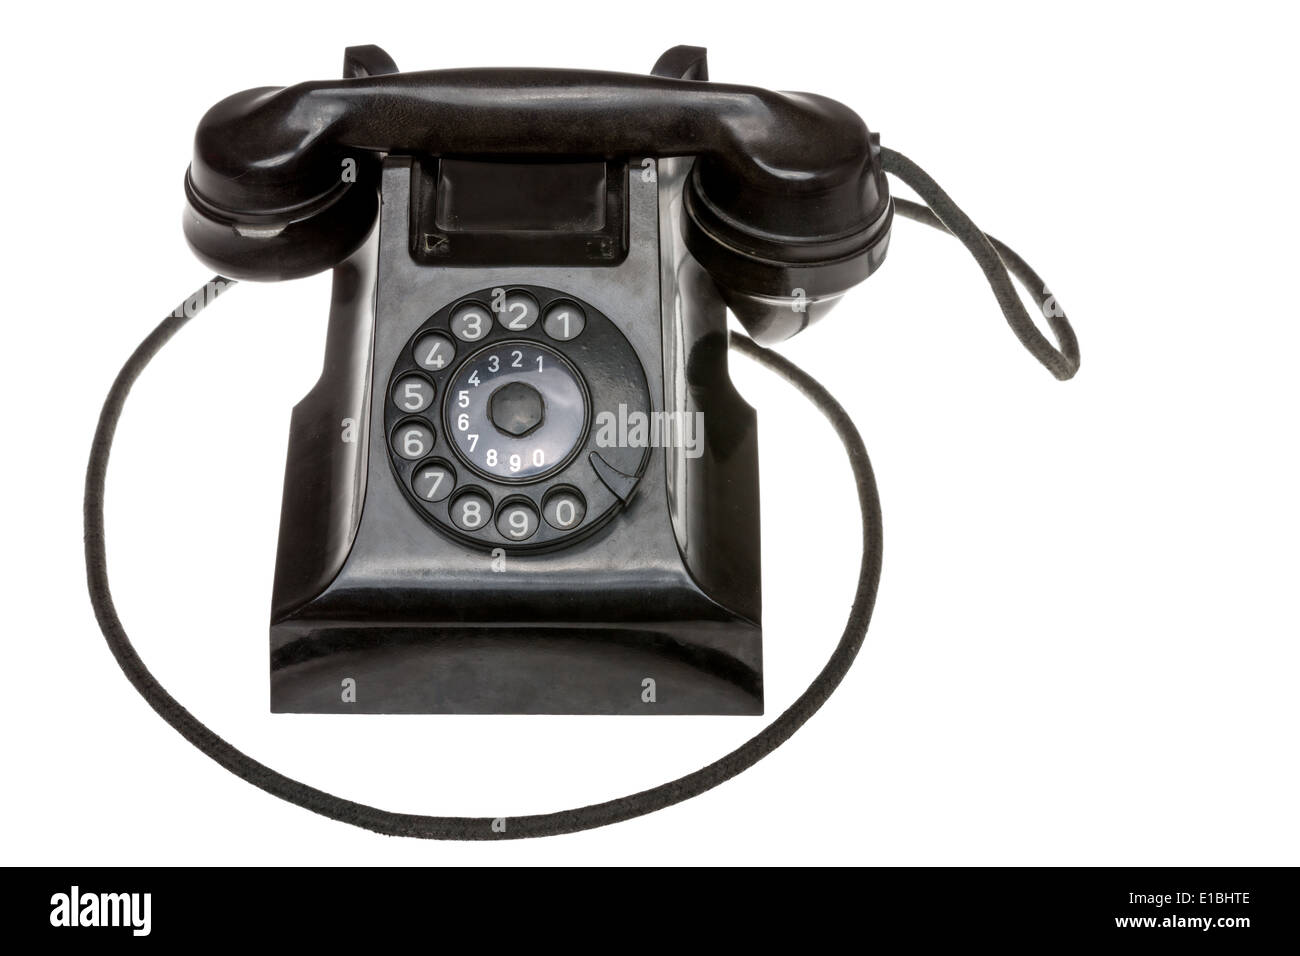 Classic old black rotary dial-up telephone instrument, closeup frontal view with the handset in place over a white studio backgr Stock Photo